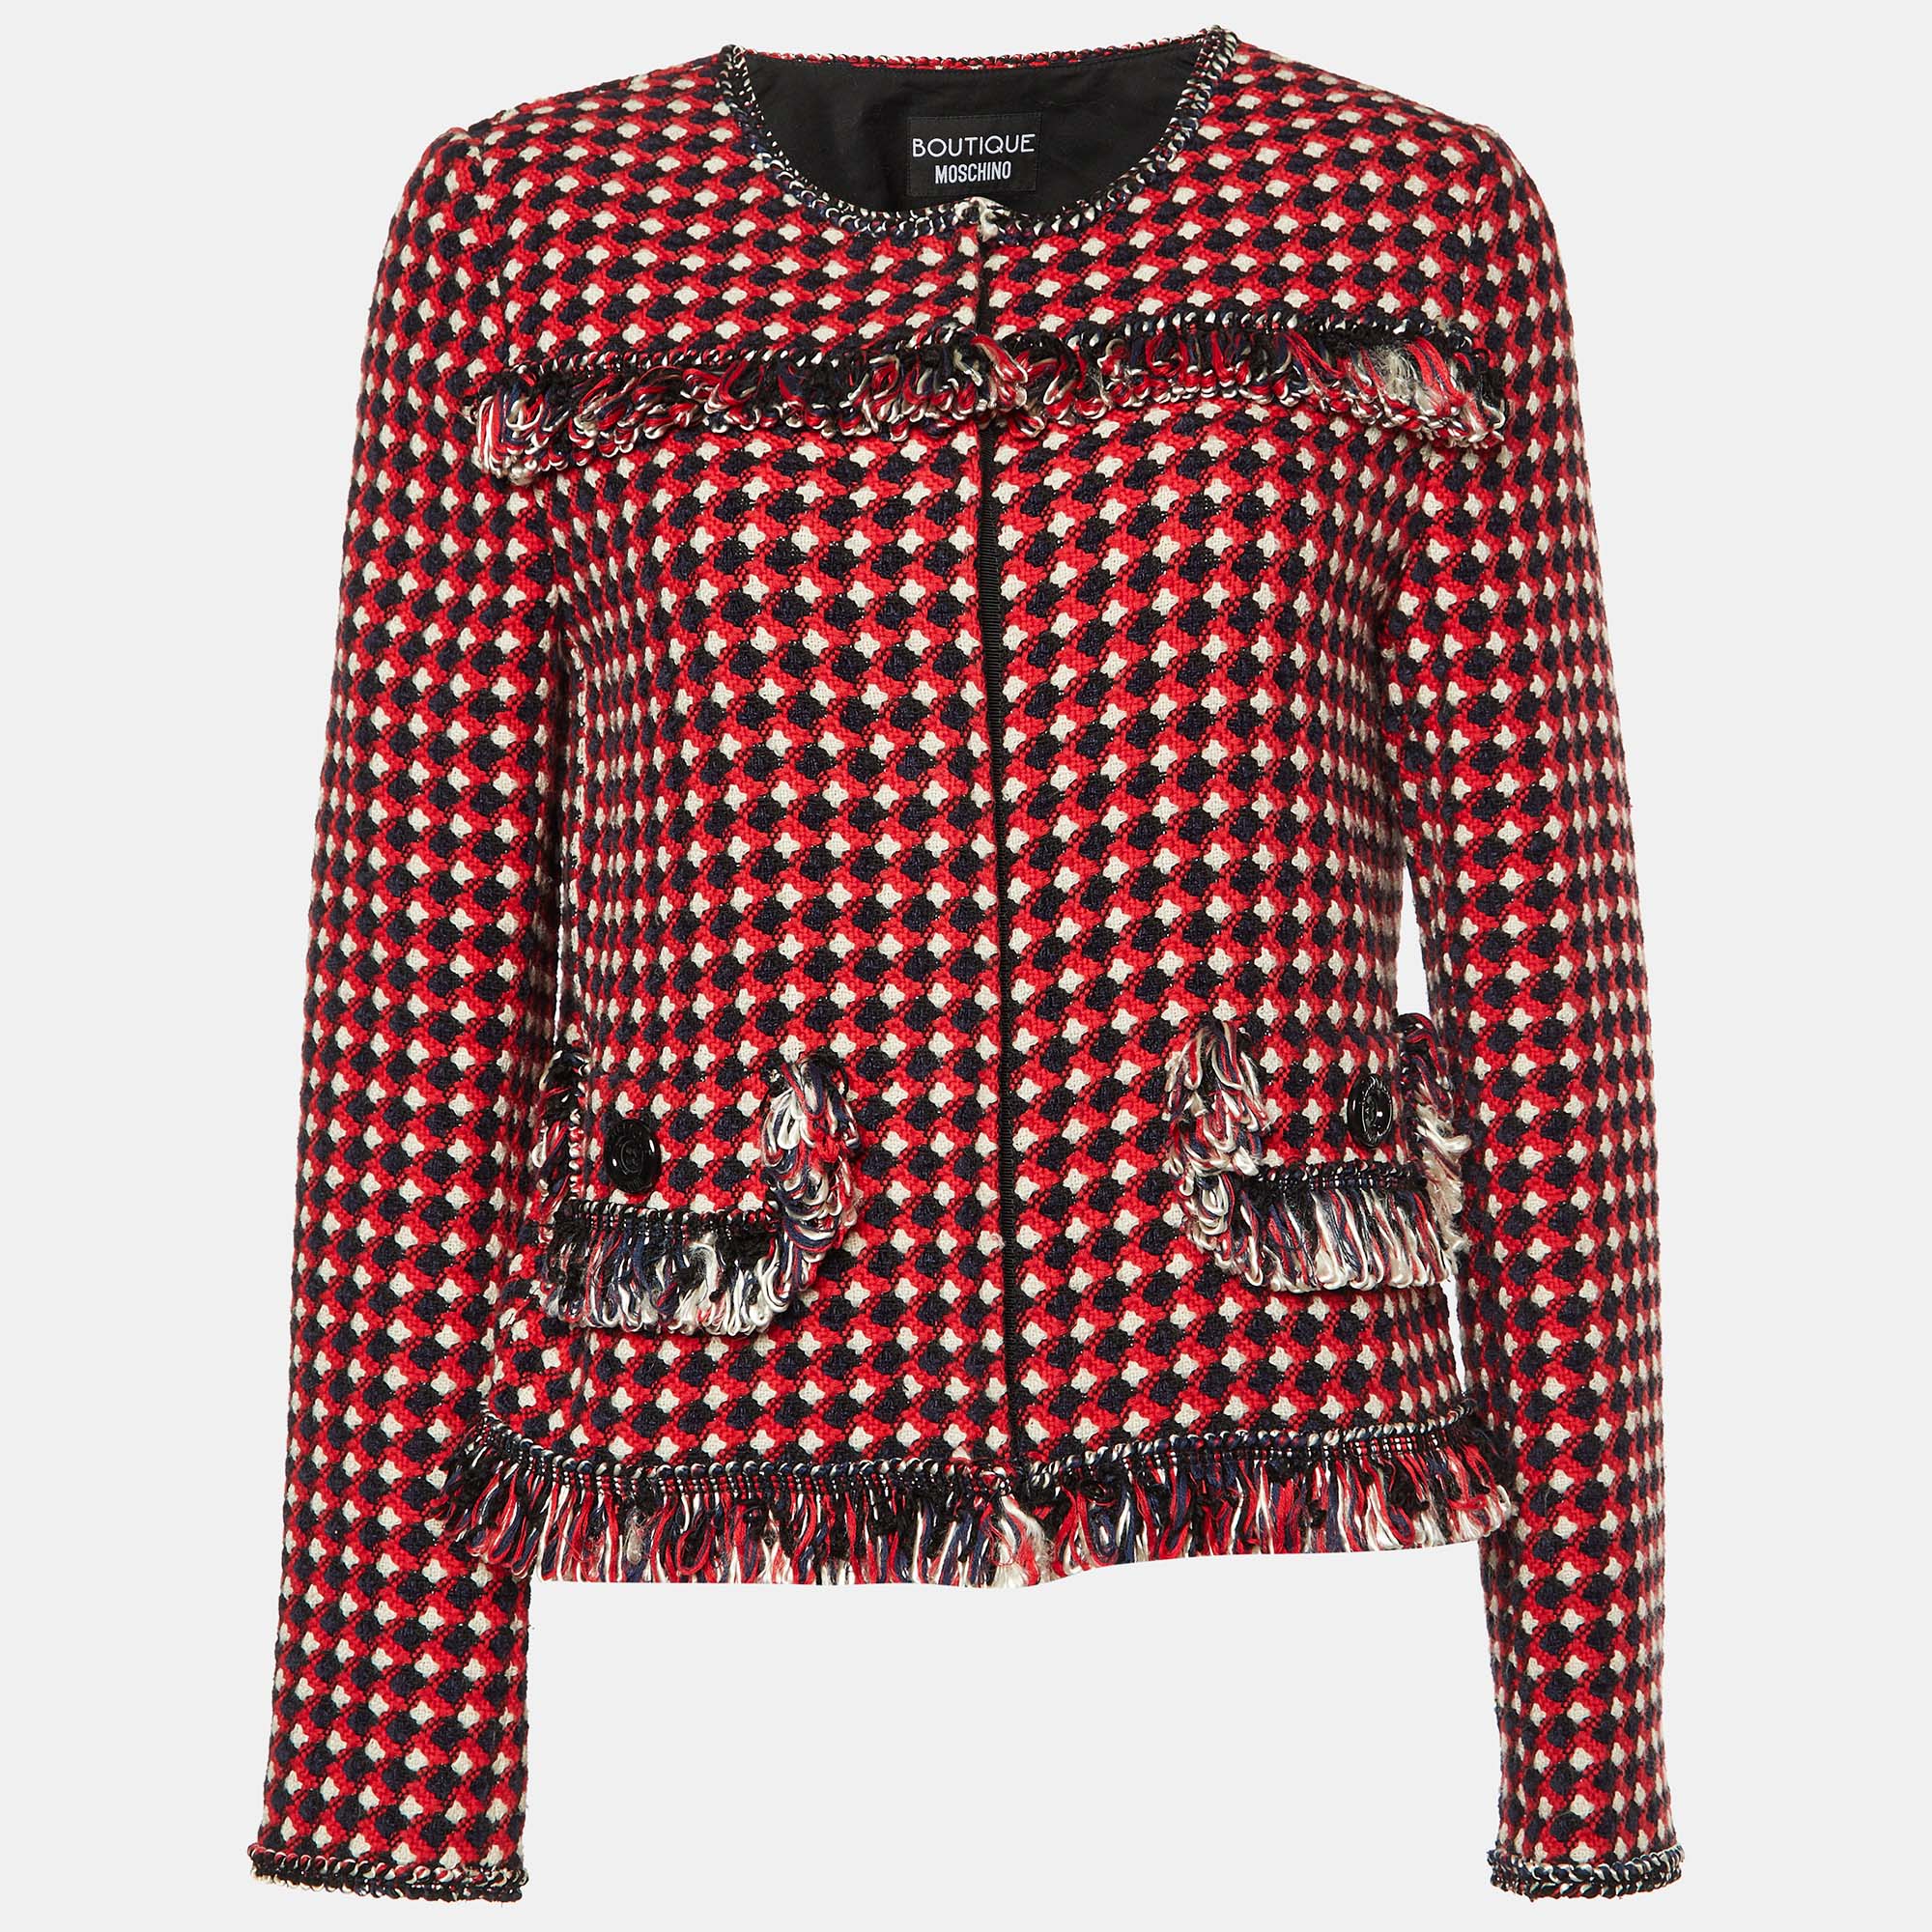 Boutique moschino red tweed fringed jacket m